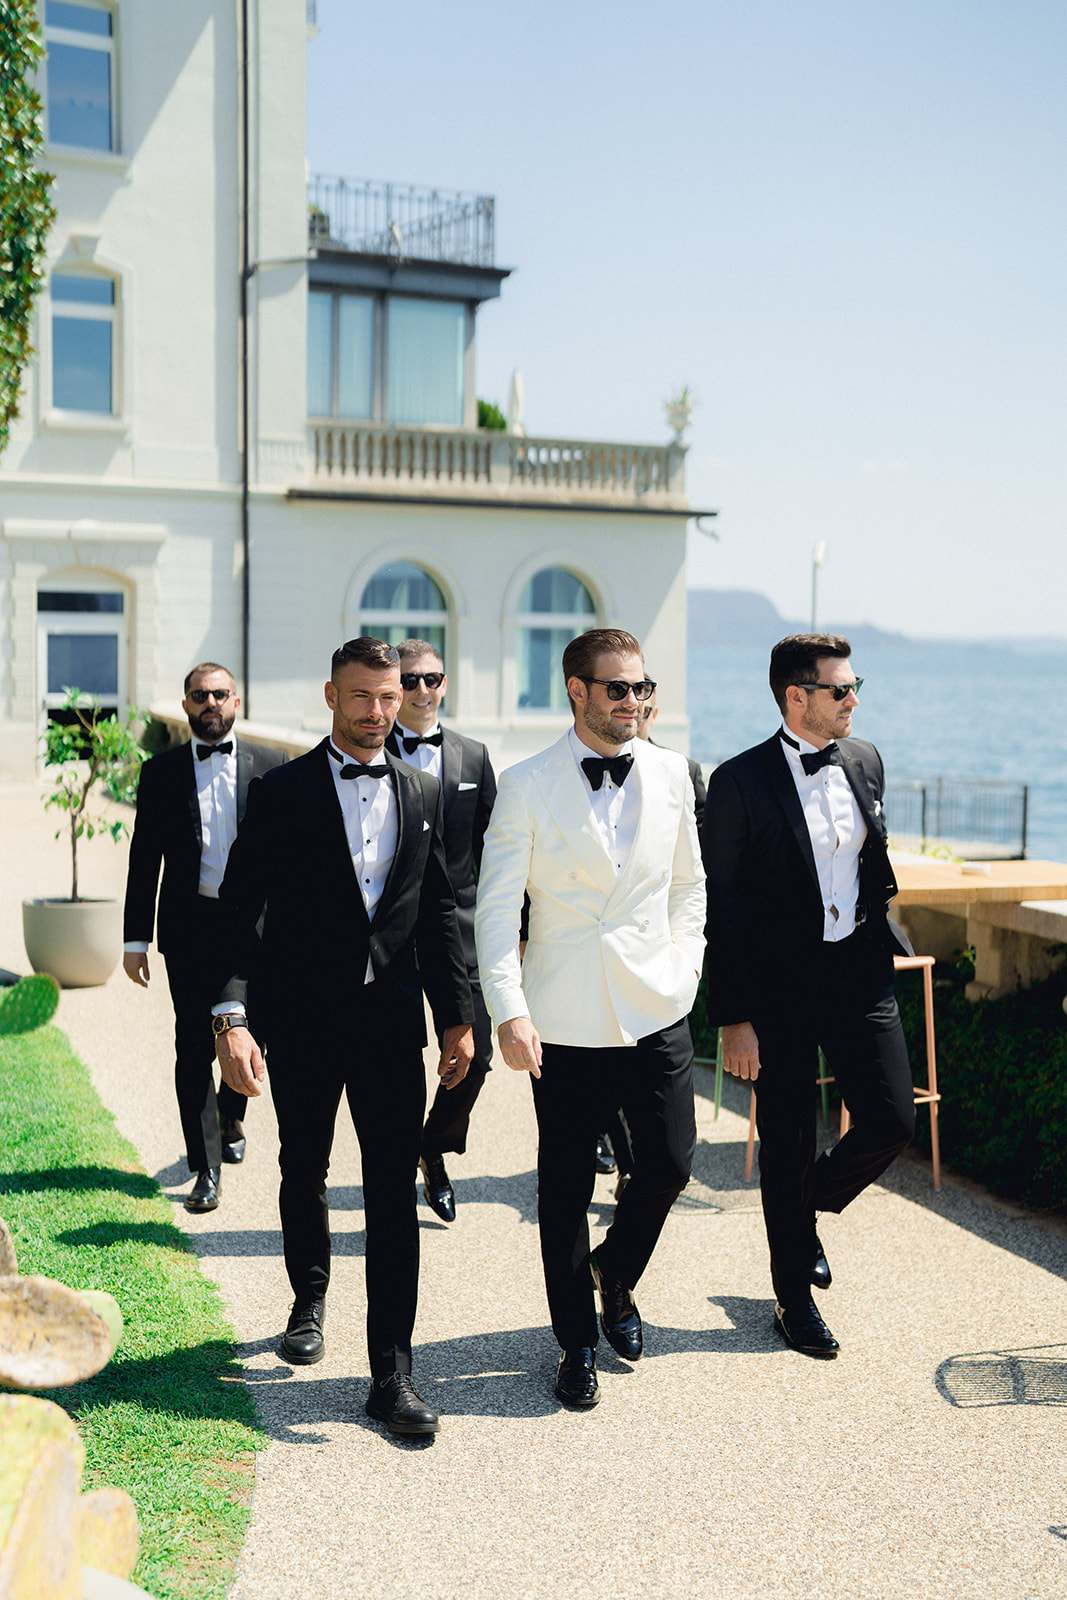 The groom & the groomsmen leave Hotel Bellariva dressed in coordinated tuxedos to reach the ceremony in Isola del Garda